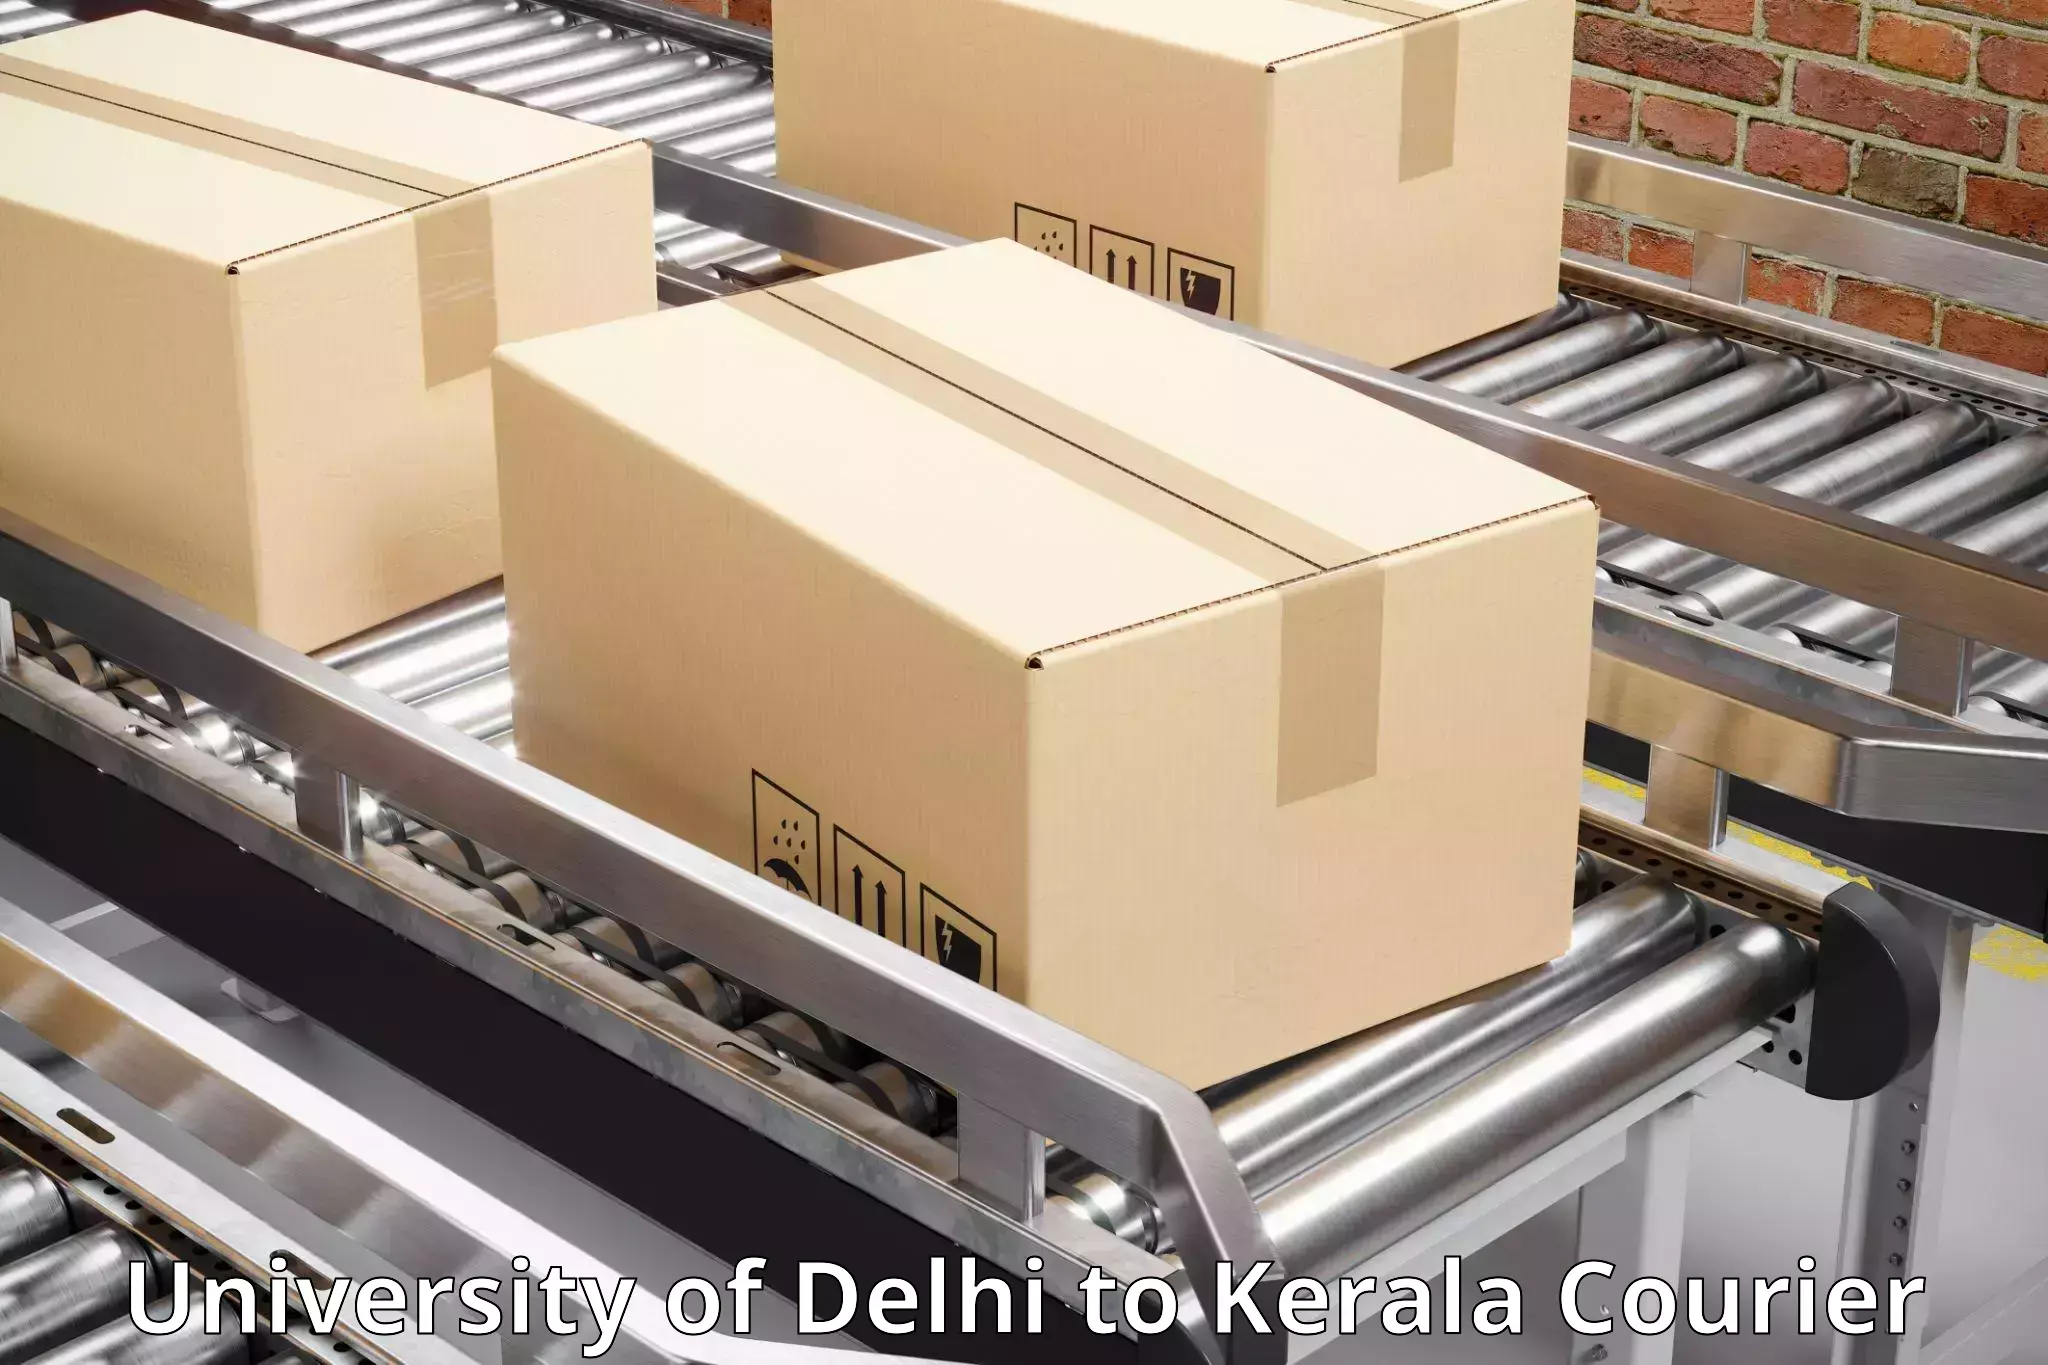 Express package services University of Delhi to Cochin Port Kochi